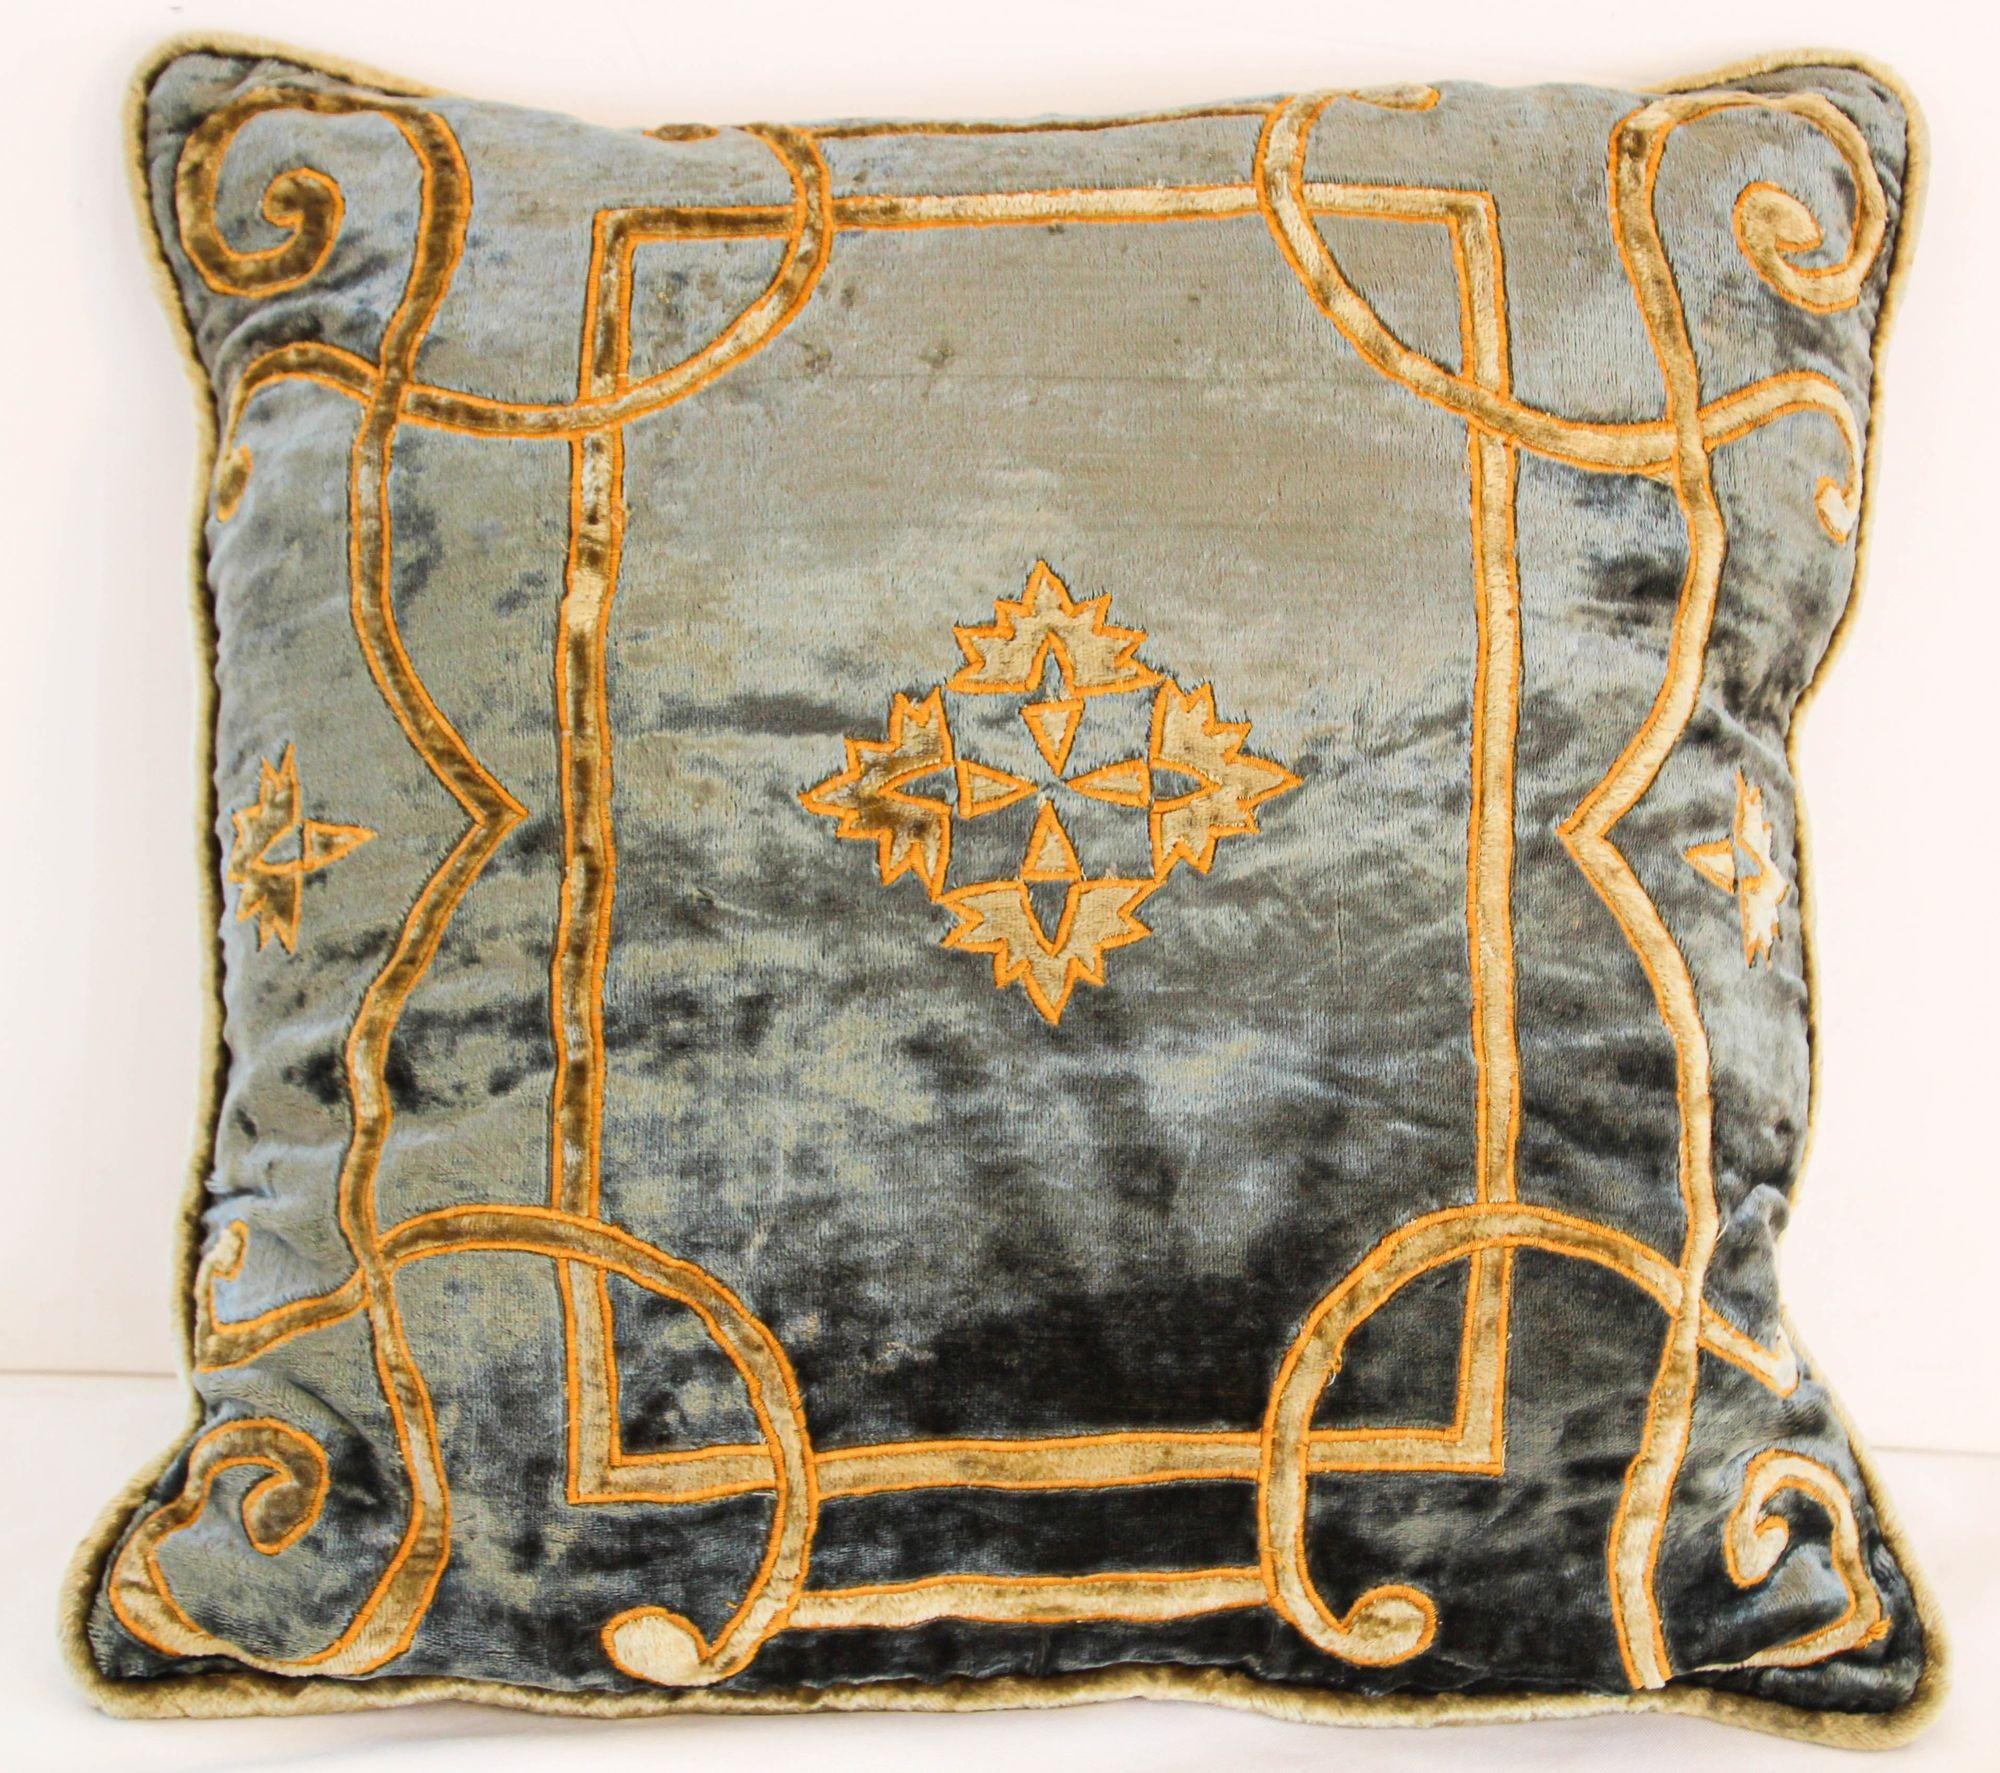 Baroque Venetian Style, Red and Gold Velvet Pillow, Elaborate Applique Work For Sale 2